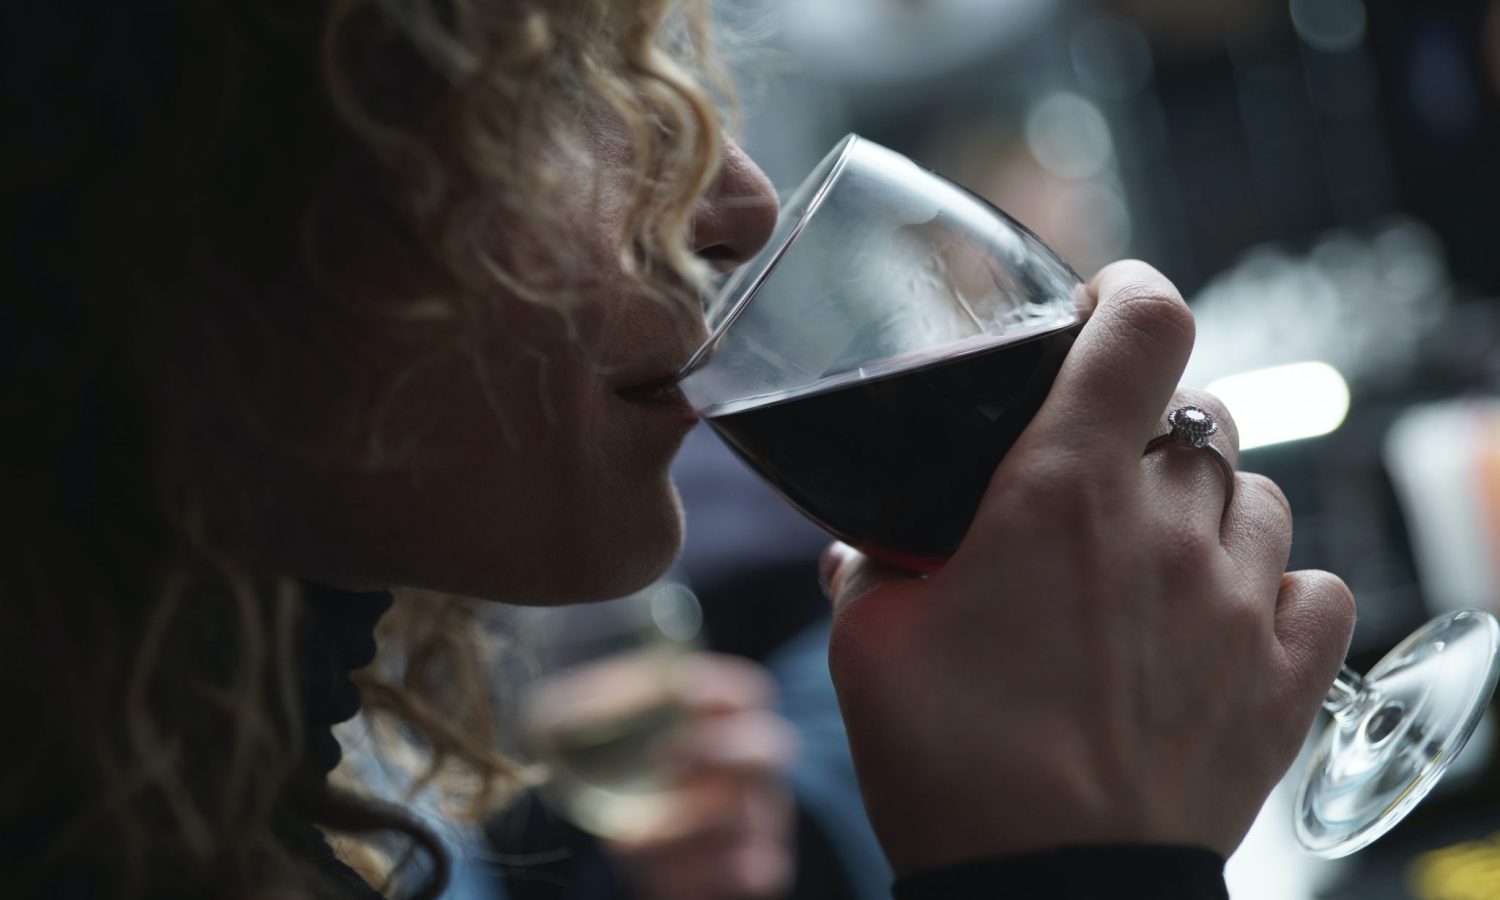 You Should Monitor Your Wine Intake If You Suffer From This Medical Condition